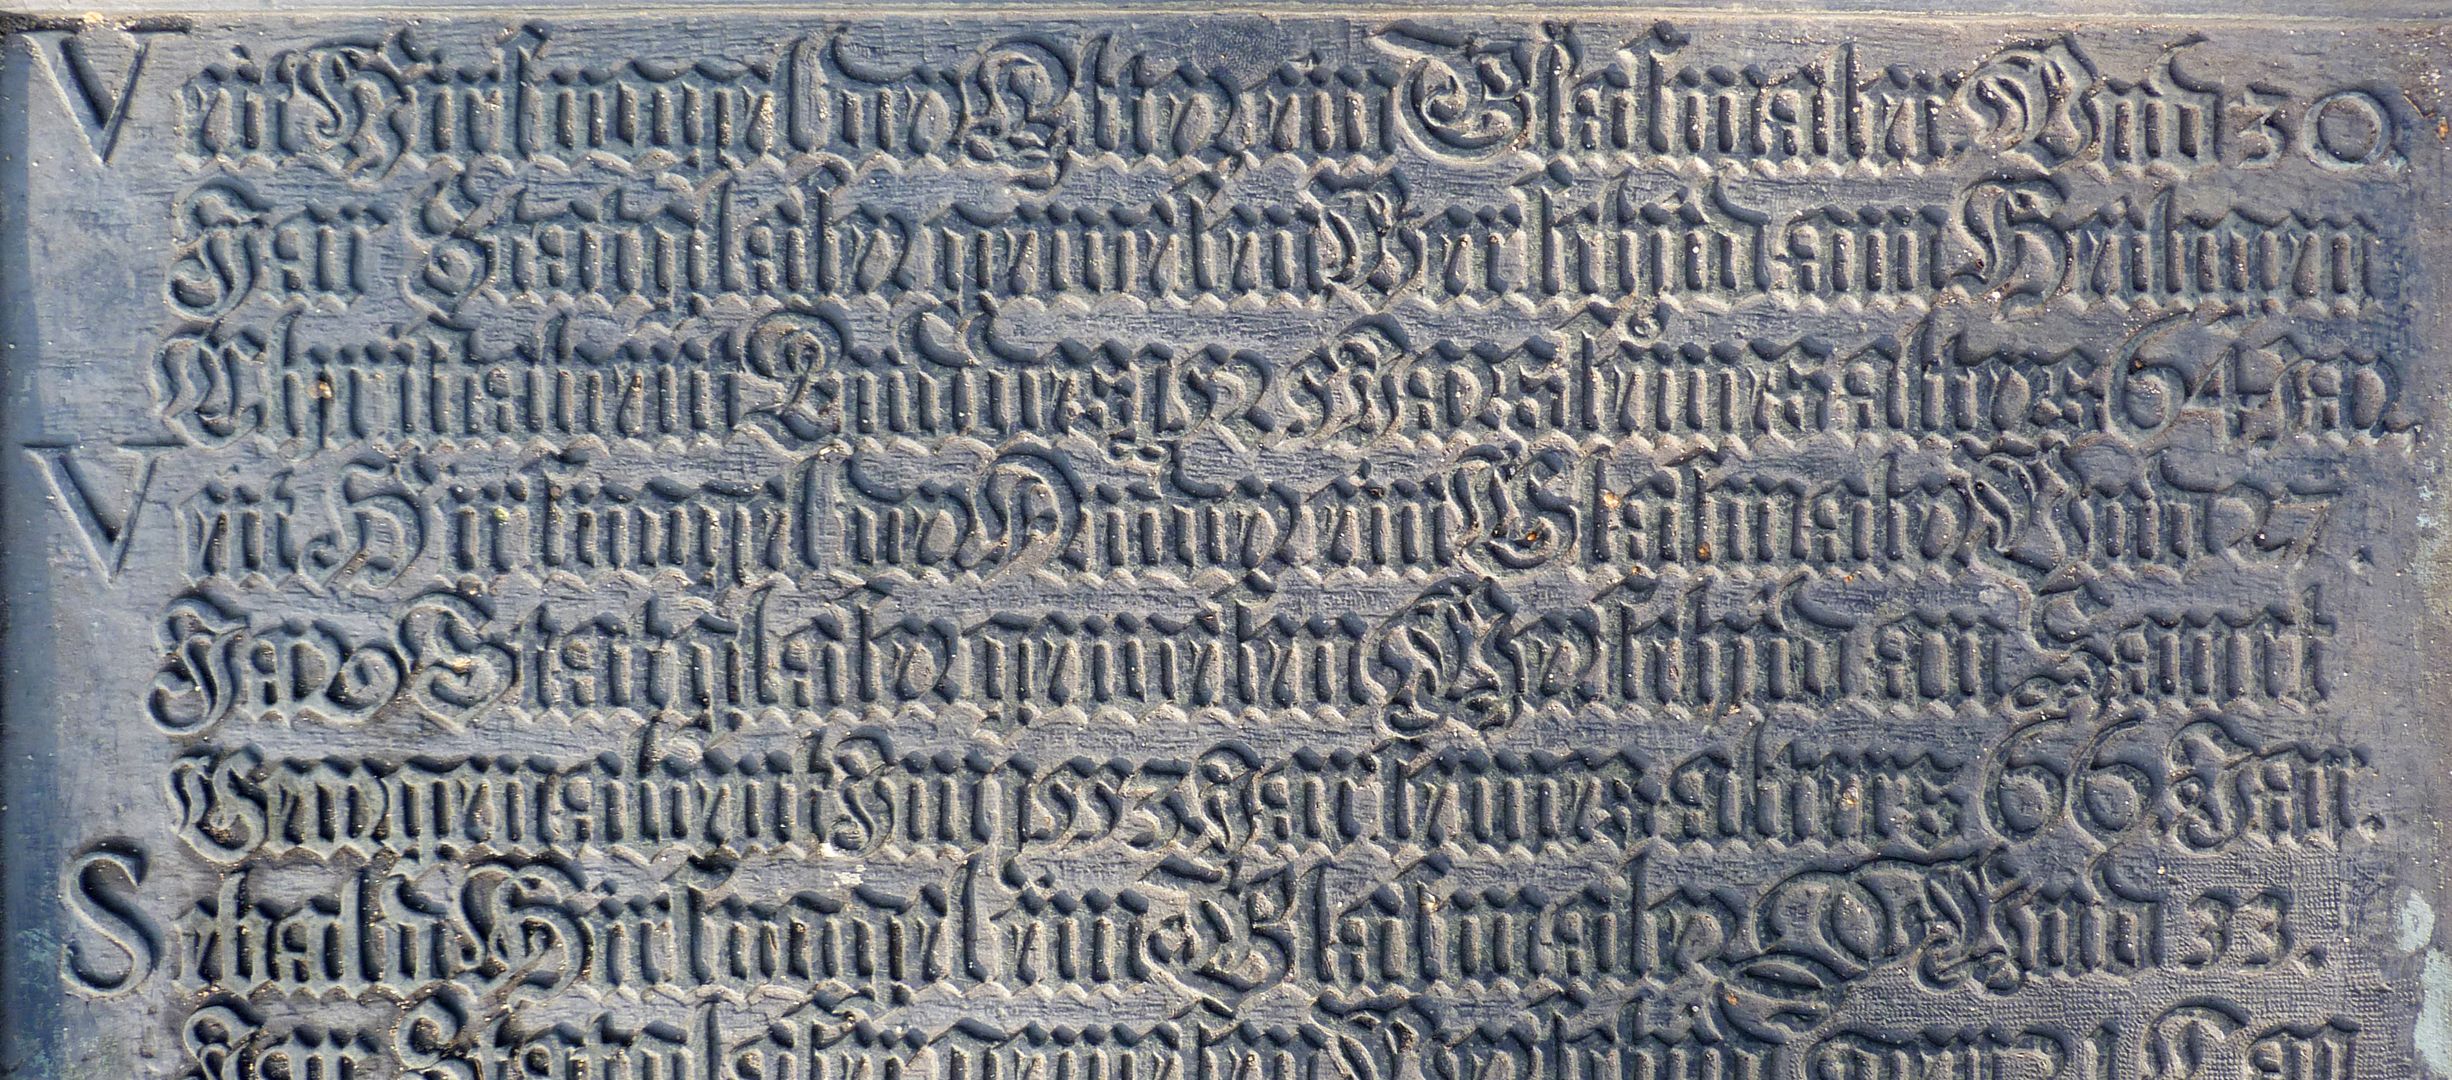 Hirsvogel Epitaph Upper part of the panel with entry Veit Hirsvogel the Elder and Veit Hirsvogel the Younger.